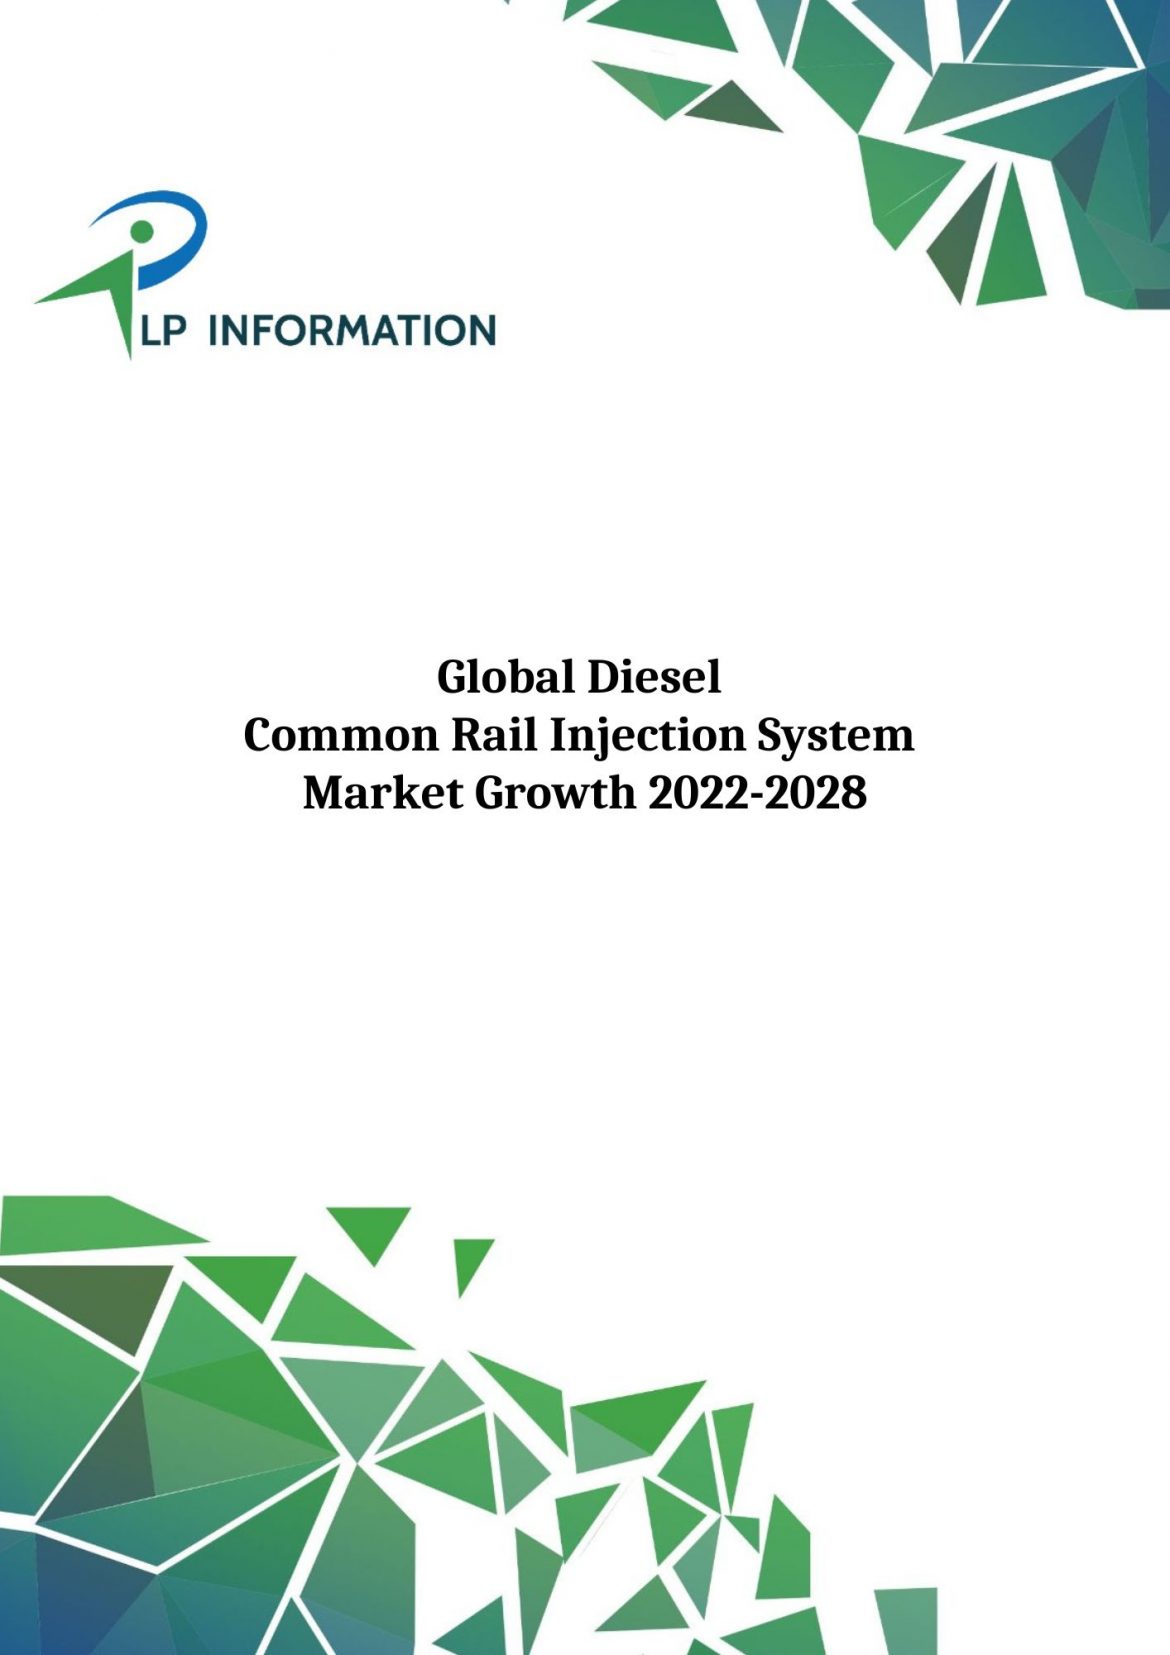 Global Diesel Common Rail Injection System Market Growth 2022-2028